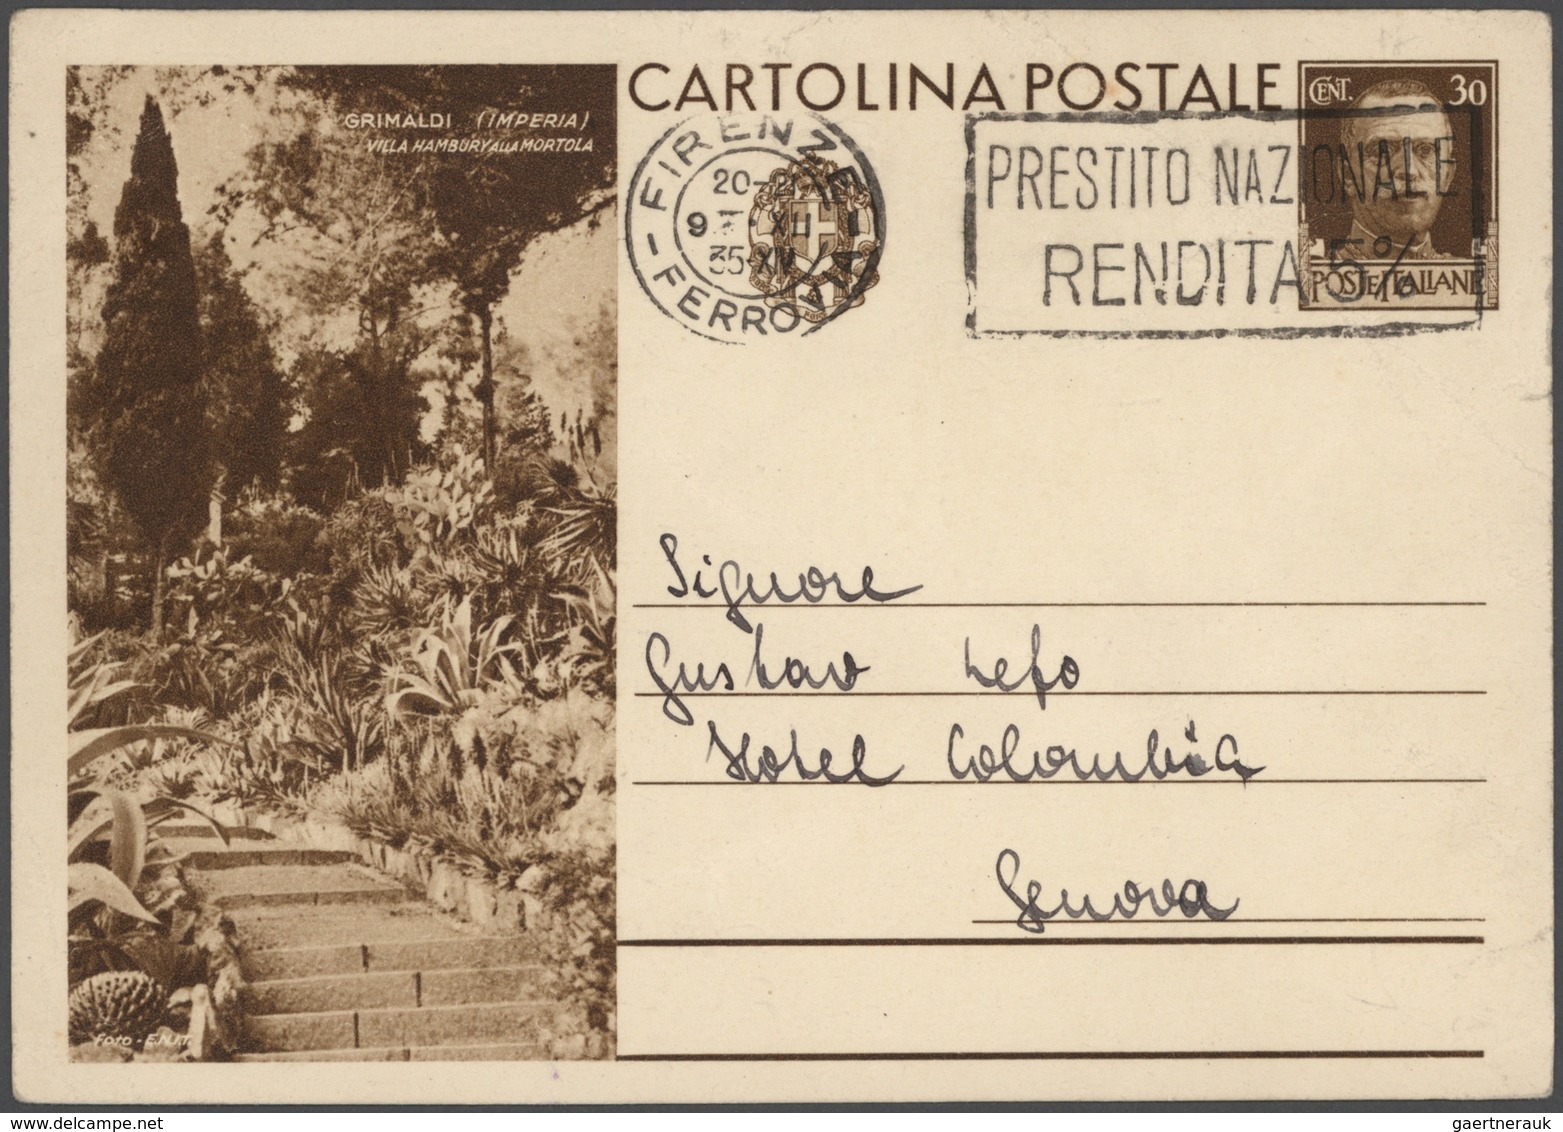 Italien: 1873/1997 accumulation of ca. 430 unused/CTO-used and used postal stationeries (picture pos